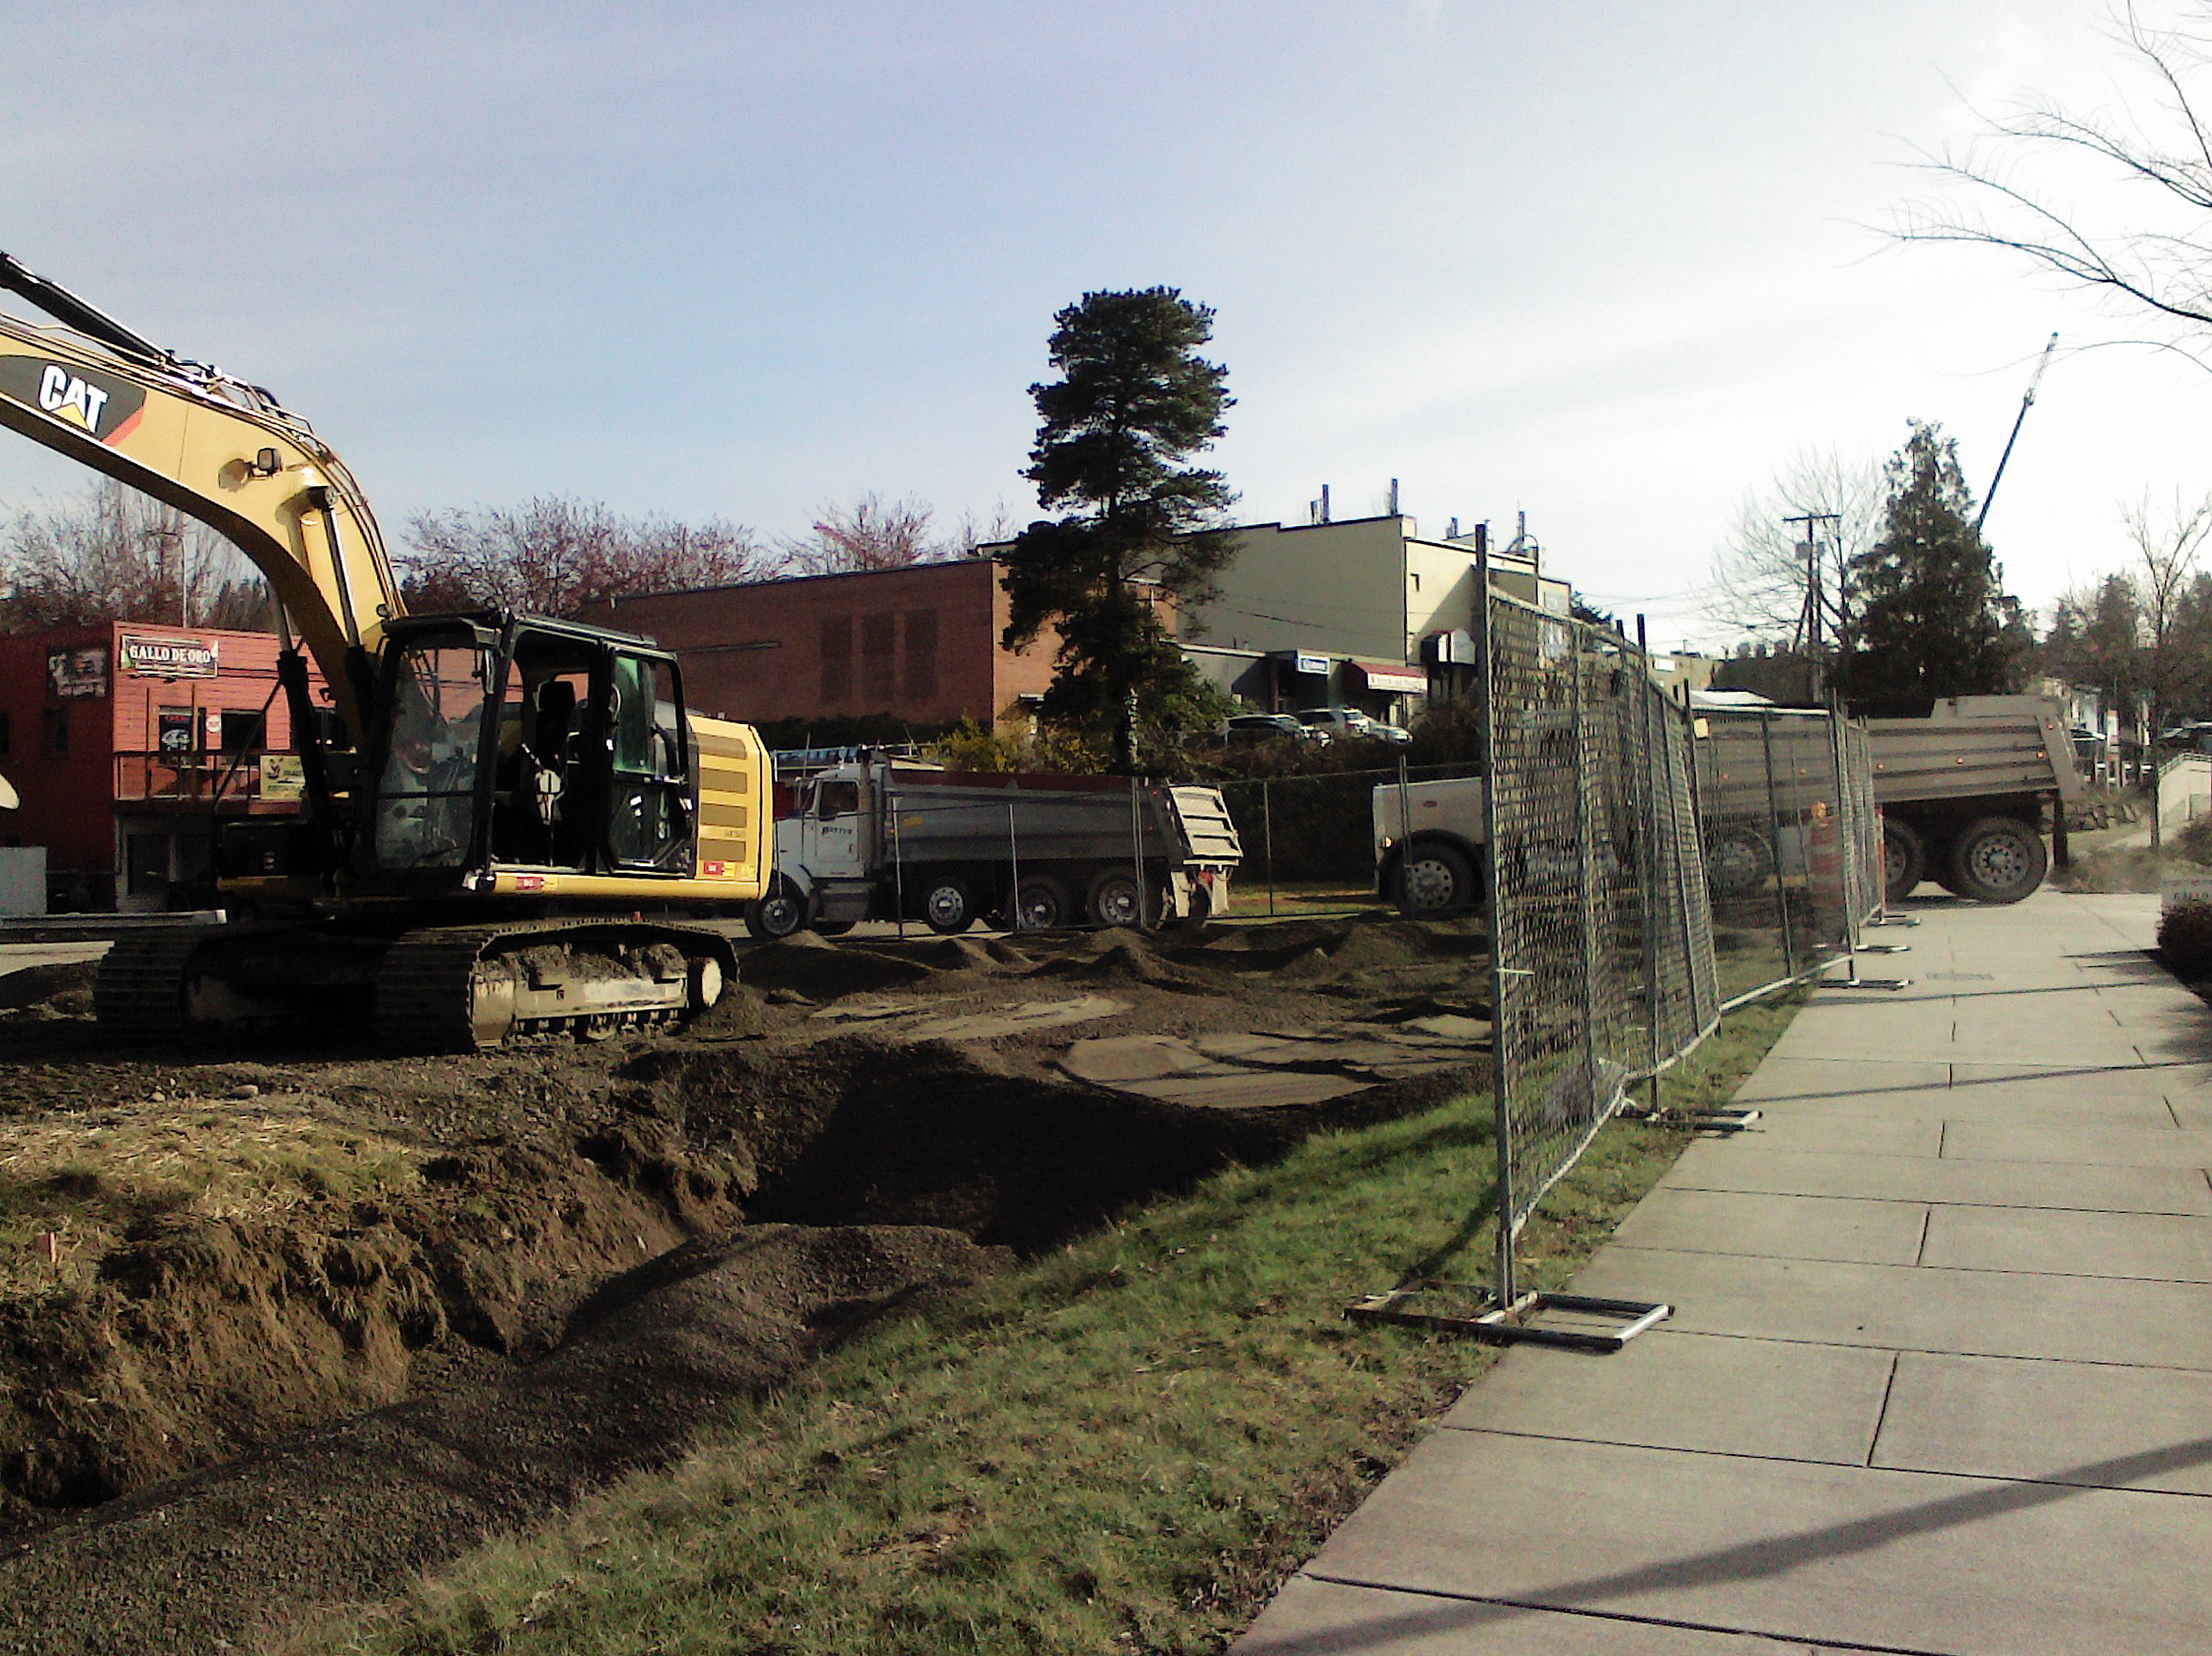 An excavator removing topsoil.